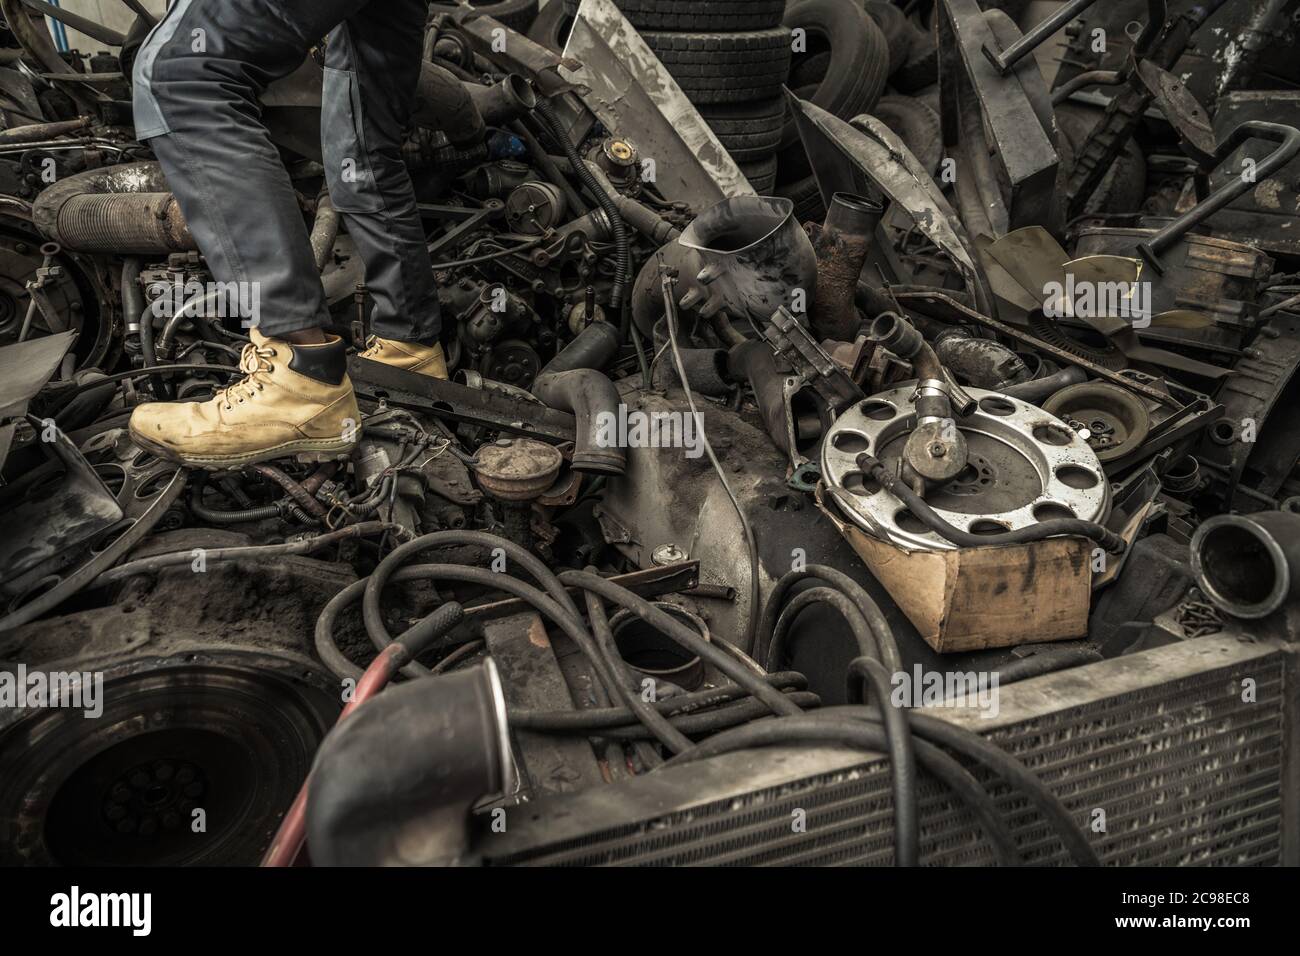 Hoarder Auto Service Worker Walking on a Pile of Automotive Waste and Used Parts. Transportation Industry Theme. Stock Photo